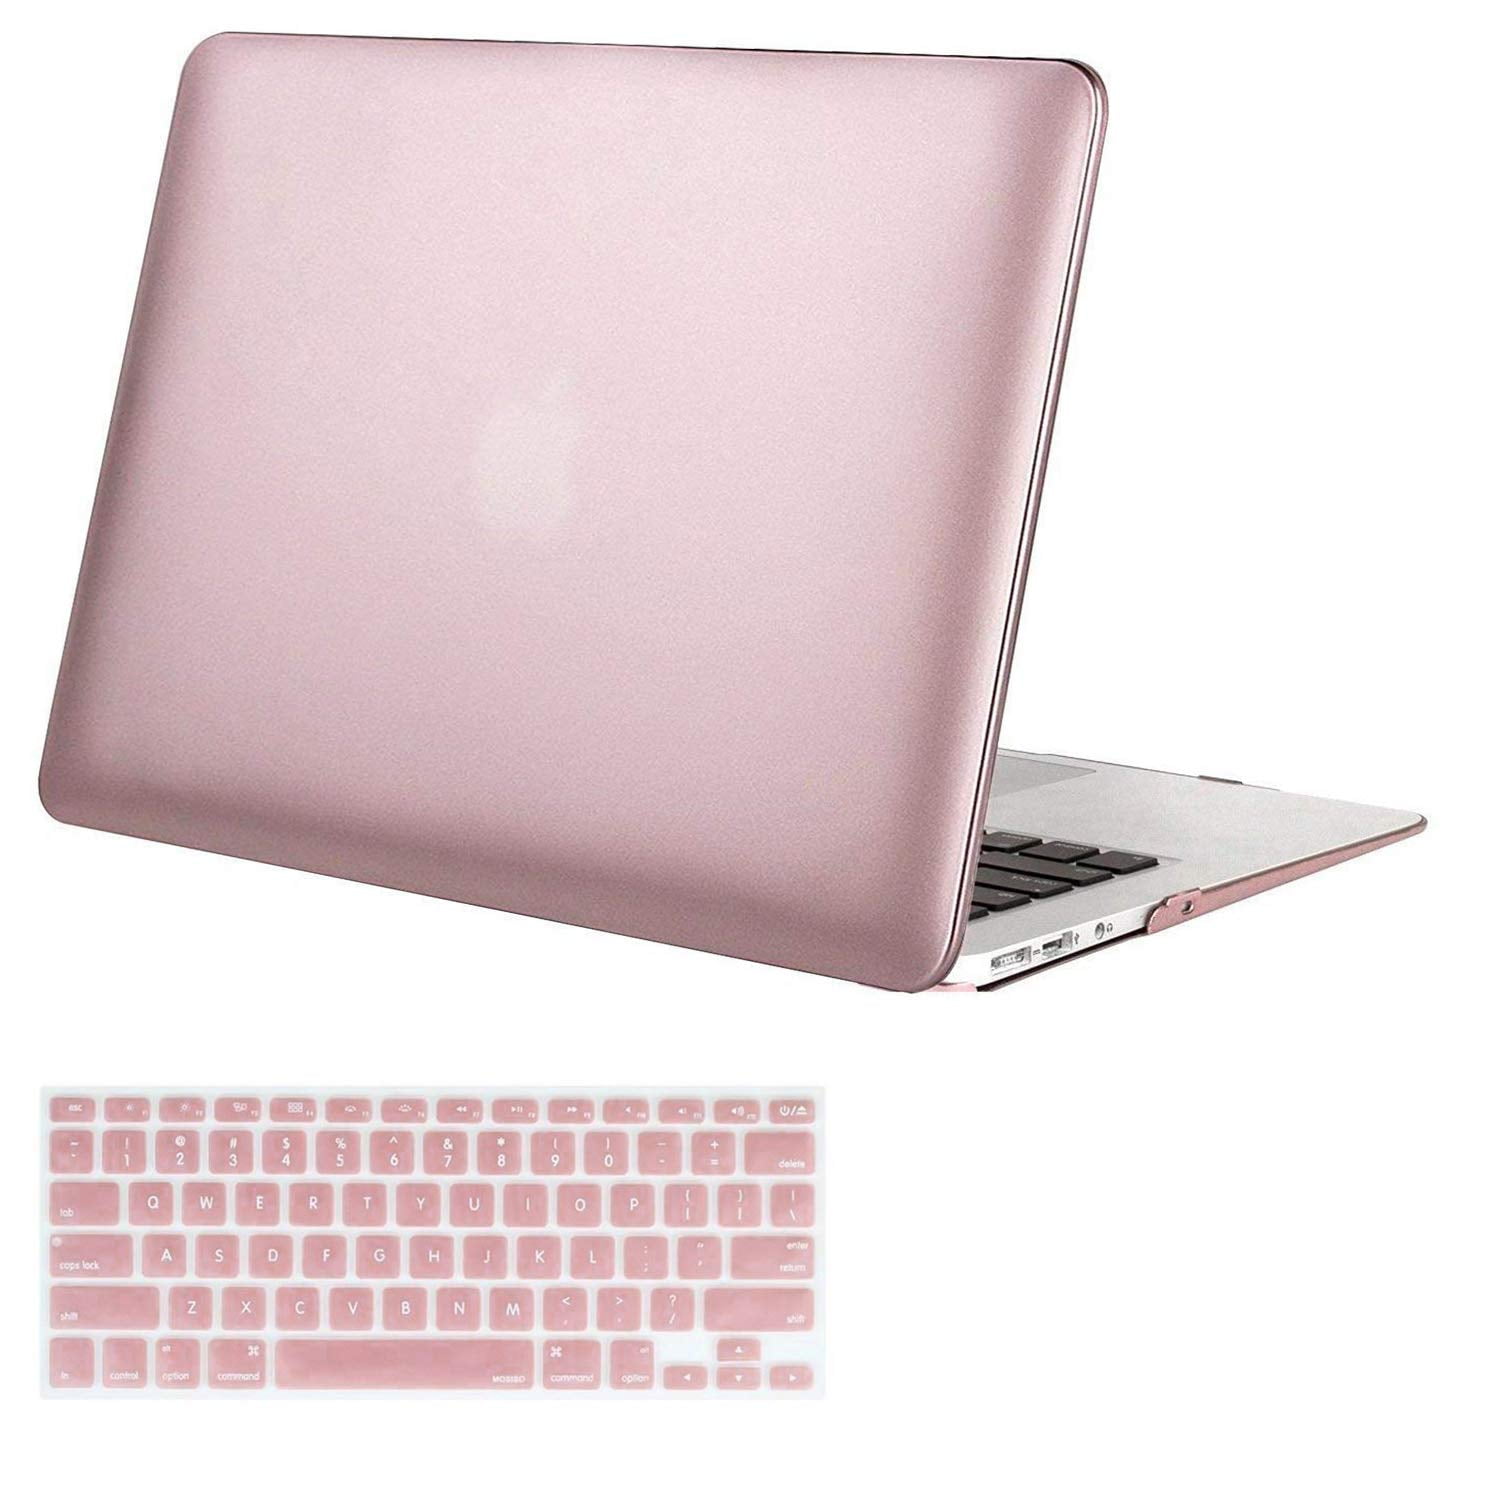 MacBook Air 13 Inch Case Brown Retro Background Film Strips MacBook Air11 Case MacBook Pro13 Pro15 Plastic Case Keyboard Cover,Screen Protector,Keyboard Cleaning Brush